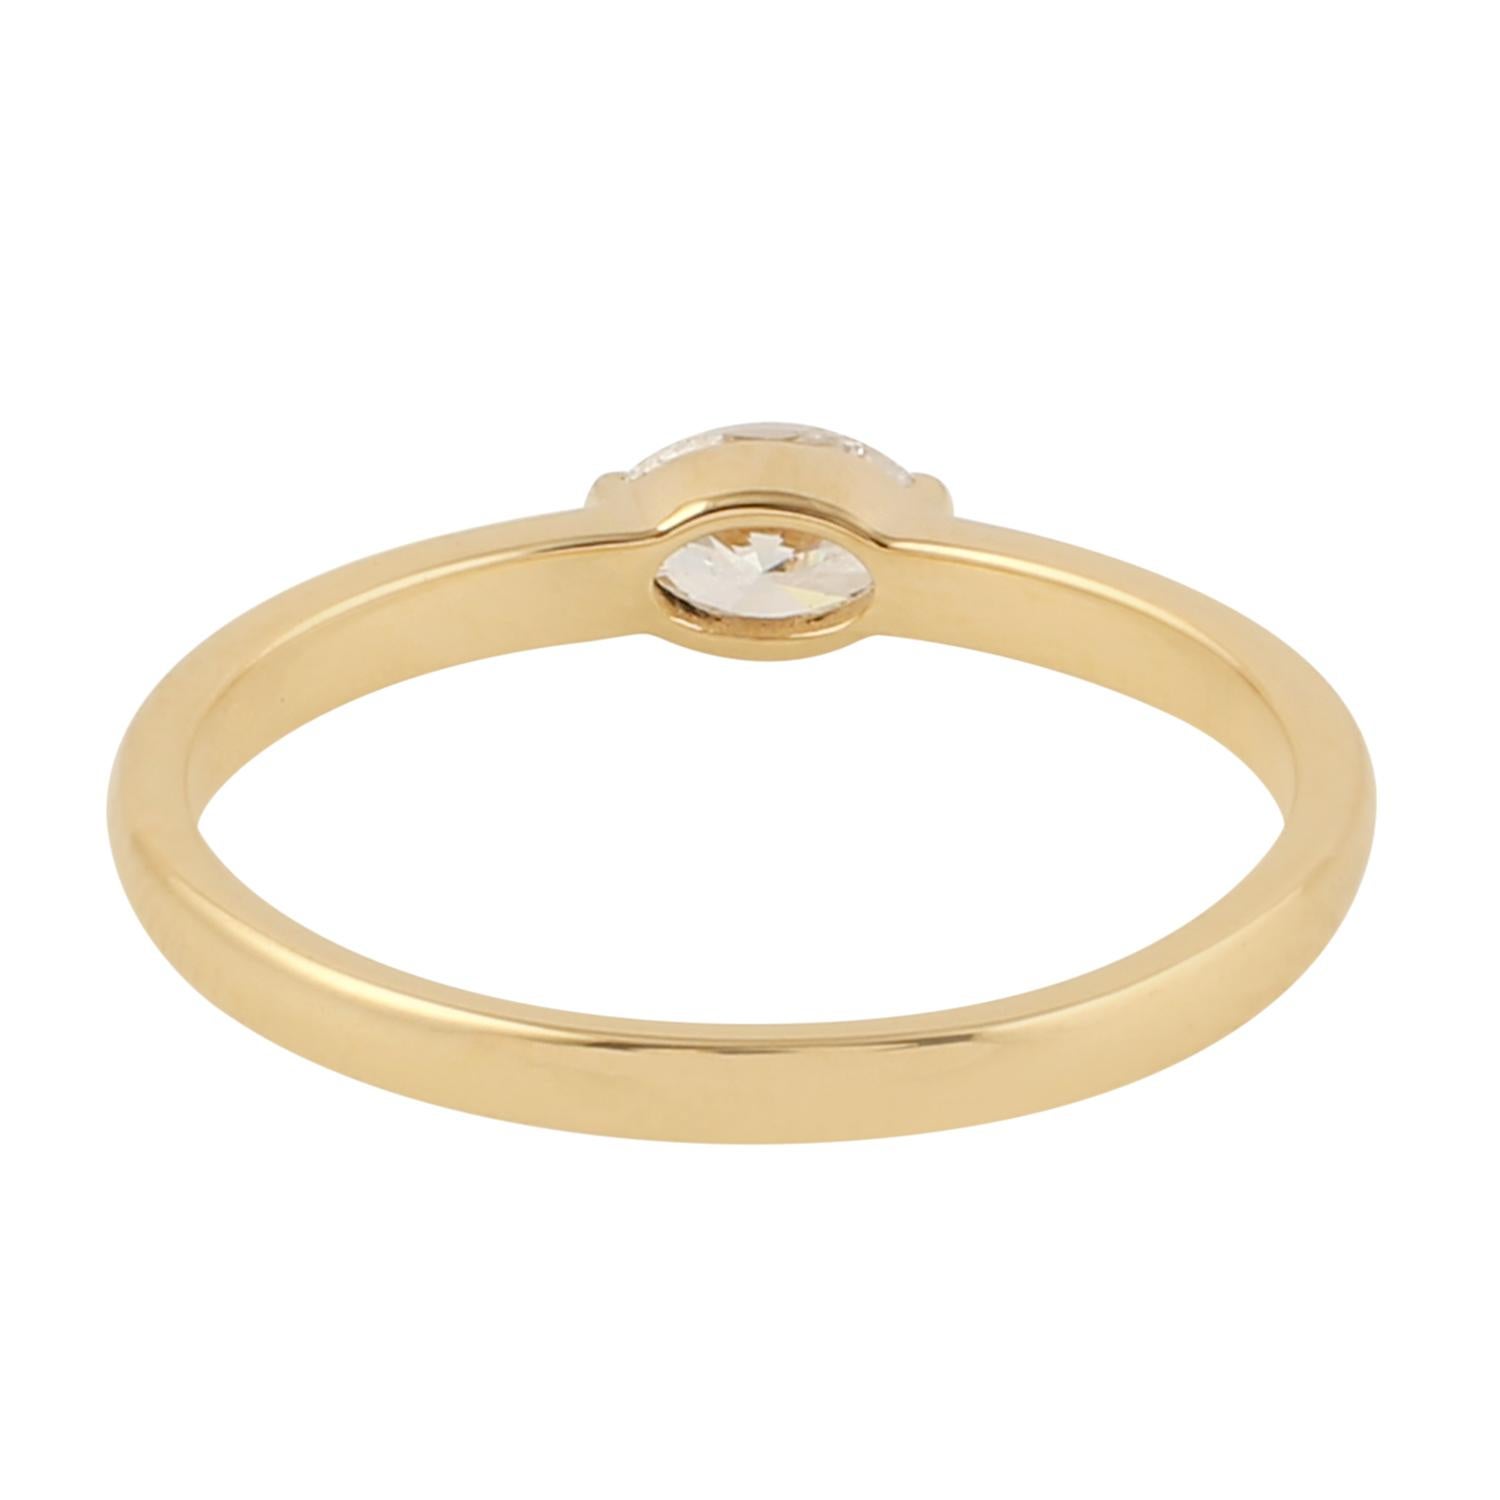 Mixed Cut Oval Shaped Rosecut Diamonds Band Ring Made In 18k Yellow Gold For Sale